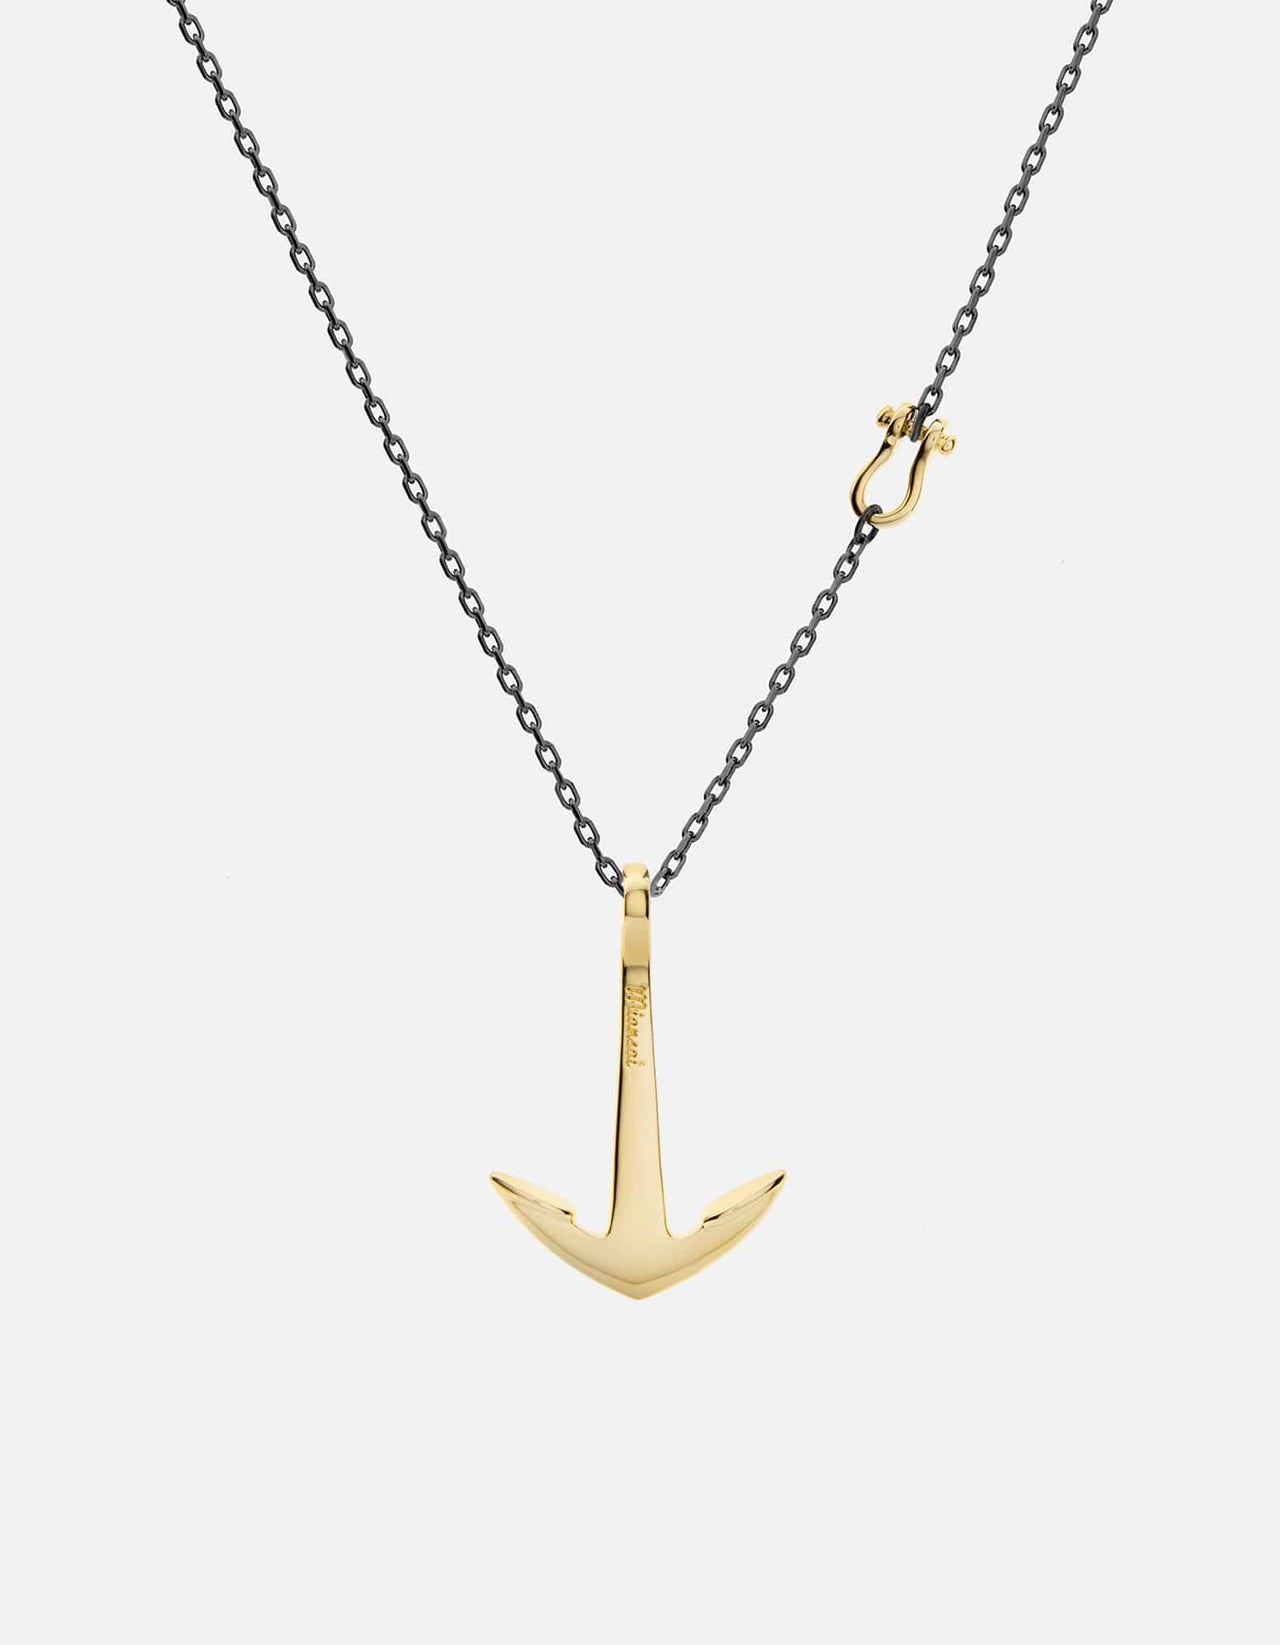 Aumaris Anchor Chains - Gold Anchor Chains - Anchor Chain Necklace -  Mariner Link Necklace - Jewelry -